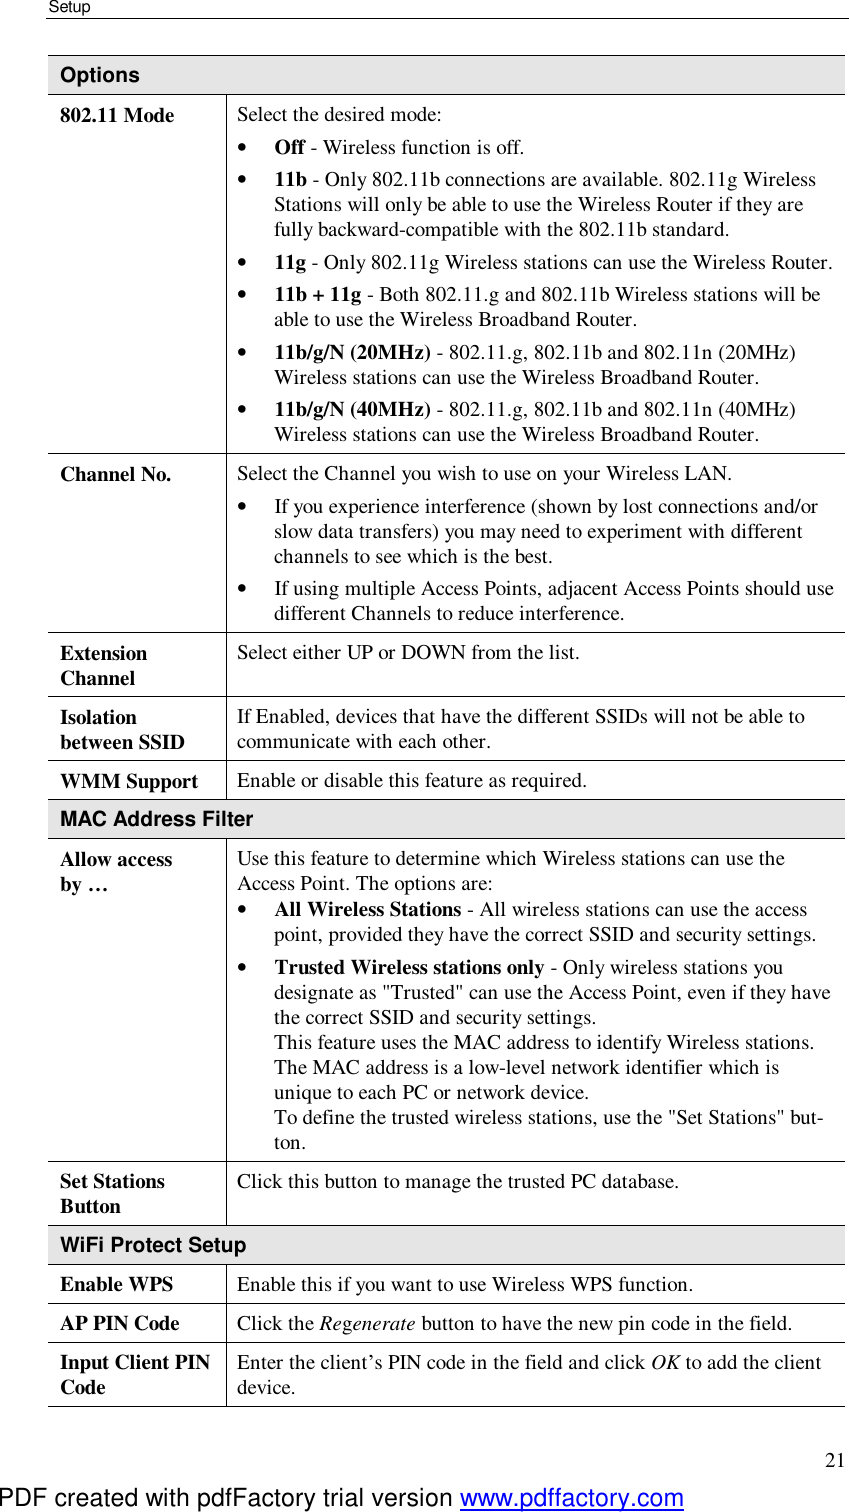 Setup 21 Options 802.11 Mode  Select the desired mode: •  Off - Wireless function is off. •  11b - Only 802.11b connections are available. 802.11g Wireless Stations will only be able to use the Wireless Router if they are fully backward-compatible with the 802.11b standard. •  11g - Only 802.11g Wireless stations can use the Wireless Router. •  11b + 11g - Both 802.11.g and 802.11b Wireless stations will be able to use the Wireless Broadband Router. •  11b/g/N (20MHz) - 802.11.g, 802.11b and 802.11n (20MHz) Wireless stations can use the Wireless Broadband Router. •  11b/g/N (40MHz) - 802.11.g, 802.11b and 802.11n (40MHz) Wireless stations can use the Wireless Broadband Router. Channel No.  Select the Channel you wish to use on your Wireless LAN. •  If you experience interference (shown by lost connections and/or slow data transfers) you may need to experiment with different channels to see which is the best. •  If using multiple Access Points, adjacent Access Points should use different Channels to reduce interference. Extension  Channel  Select either UP or DOWN from the list. Isolation  between SSID  If Enabled, devices that have the different SSIDs will not be able to communicate with each other.  WMM Support  Enable or disable this feature as required. MAC Address Filter Allow access by … Use this feature to determine which Wireless stations can use the Access Point. The options are: •  All Wireless Stations - All wireless stations can use the access point, provided they have the correct SSID and security settings. •  Trusted Wireless stations only - Only wireless stations you designate as &quot;Trusted&quot; can use the Access Point, even if they have the correct SSID and security settings.  This feature uses the MAC address to identify Wireless stations. The MAC address is a low-level network identifier which is unique to each PC or network device. To define the trusted wireless stations, use the &quot;Set Stations&quot; but-ton. Set Stations  Button  Click this button to manage the trusted PC database. WiFi Protect Setup Enable WPS  Enable this if you want to use Wireless WPS function. AP PIN Code  Click the Regenerate button to have the new pin code in the field. Input Client PIN Code  Enter the client’s PIN code in the field and click OK to add the client device. PDF created with pdfFactory trial version www.pdffactory.com